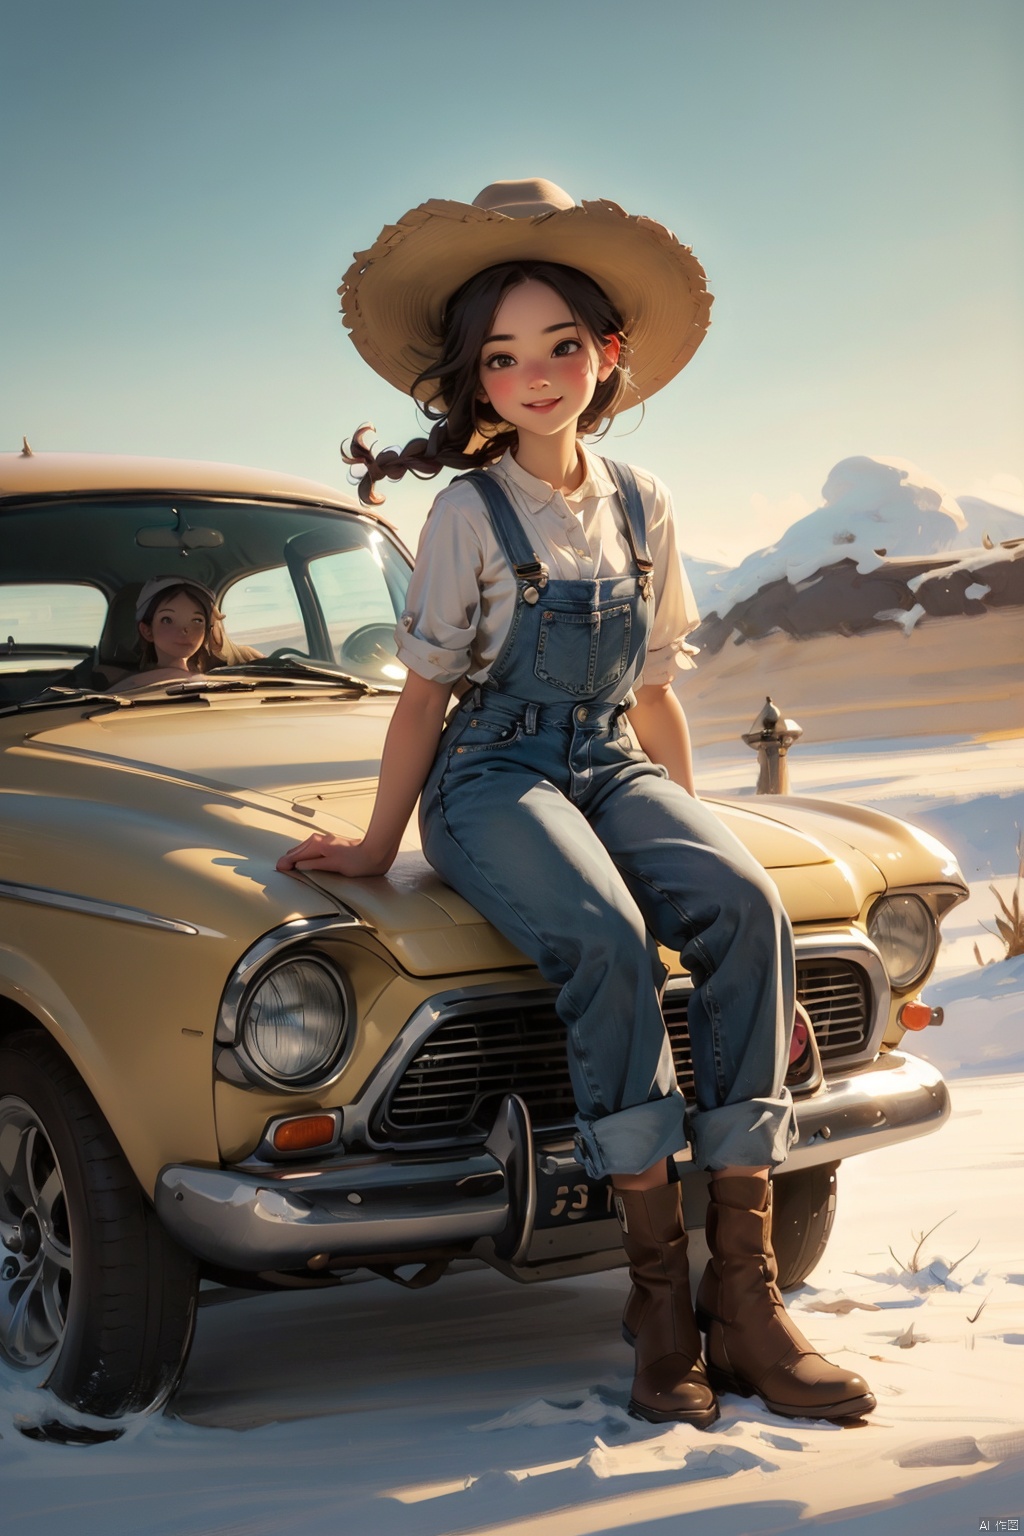 masterpiece, best quality, 8K,illustration, colorful, The rich visuals depict the joy of outdoor travel. car  Vacation girl, a girl wearing black suspenders and jeans, This is a very thin girl, not very plump, Black Fried Dough Twists Braid and black eyes, Sitting on the ground with your back against a yellow car. Wearing a cowboy hat on the head , best qualityhighly detailed, realistic rendering, Cute Smiling Girl。This painting captures the essence of innocence, beauty, and joy, making it a beautiful and captivating artwork, Fully express the joy of the character's vacatin, The girl should be thinner, Girls' clothes should not be too revealing , Hair fluttering in the wind,Clearly display feet and hands